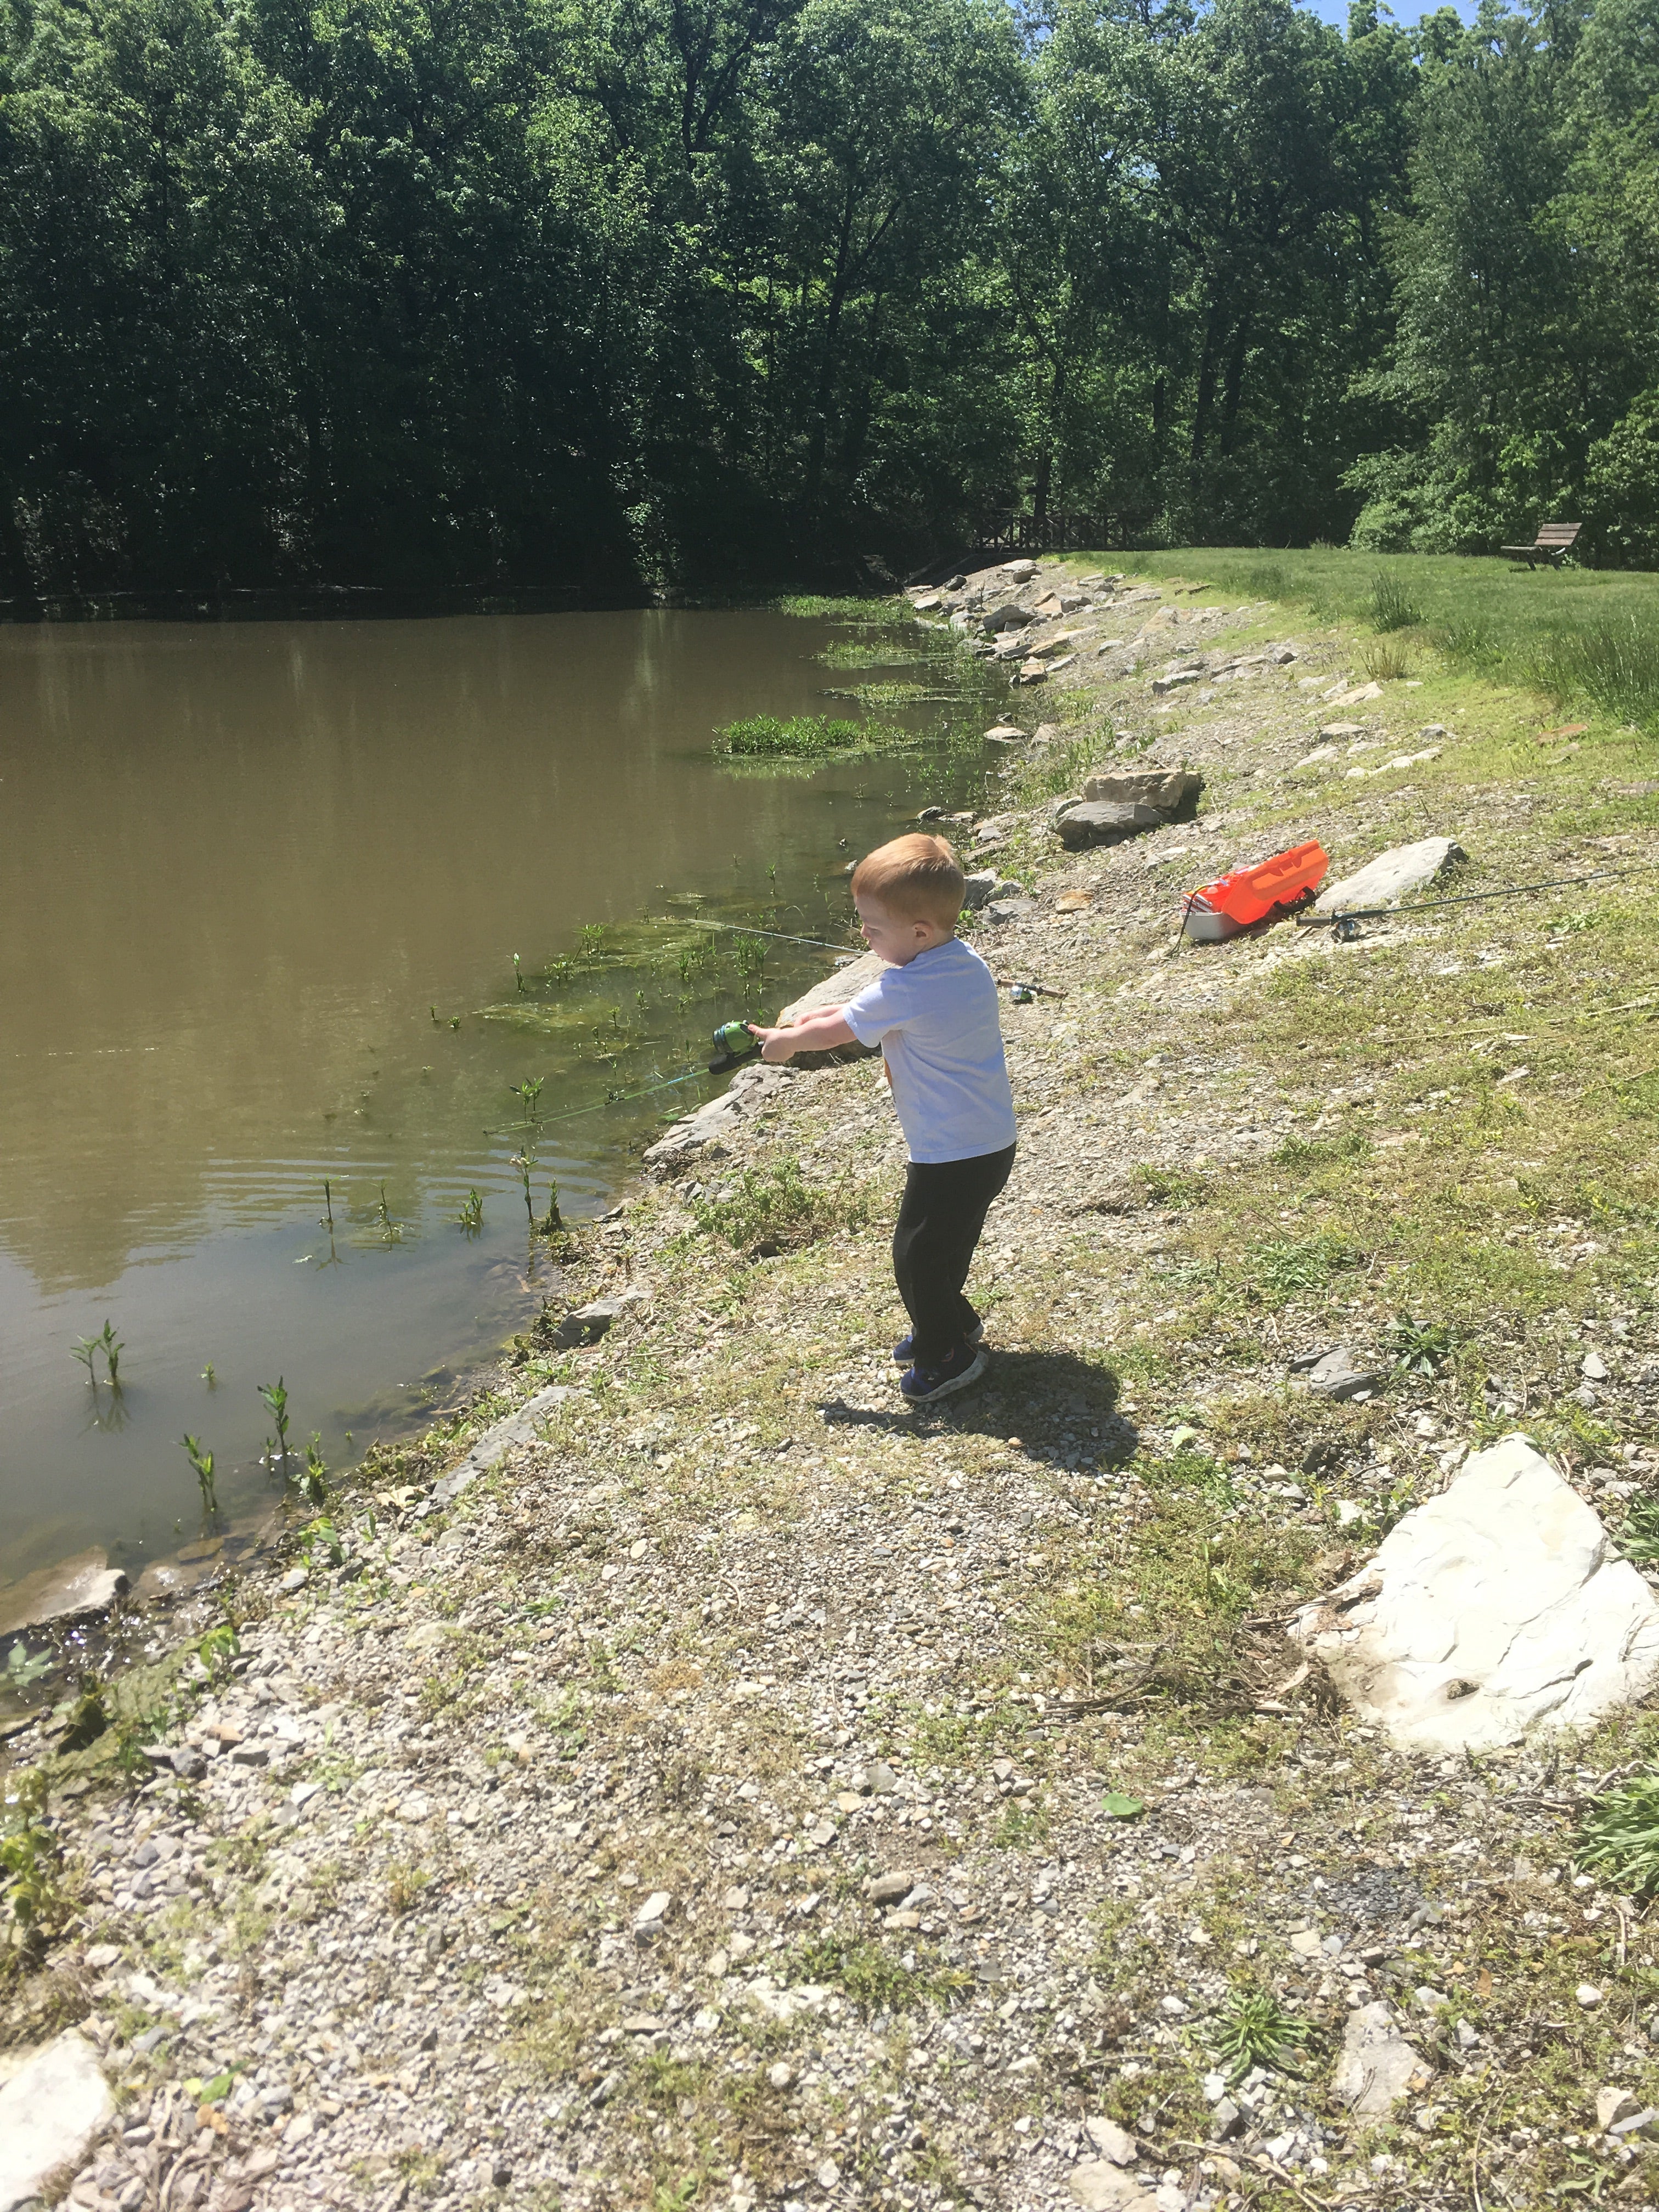 Wallace is a great place for kids to hone their fishing skills